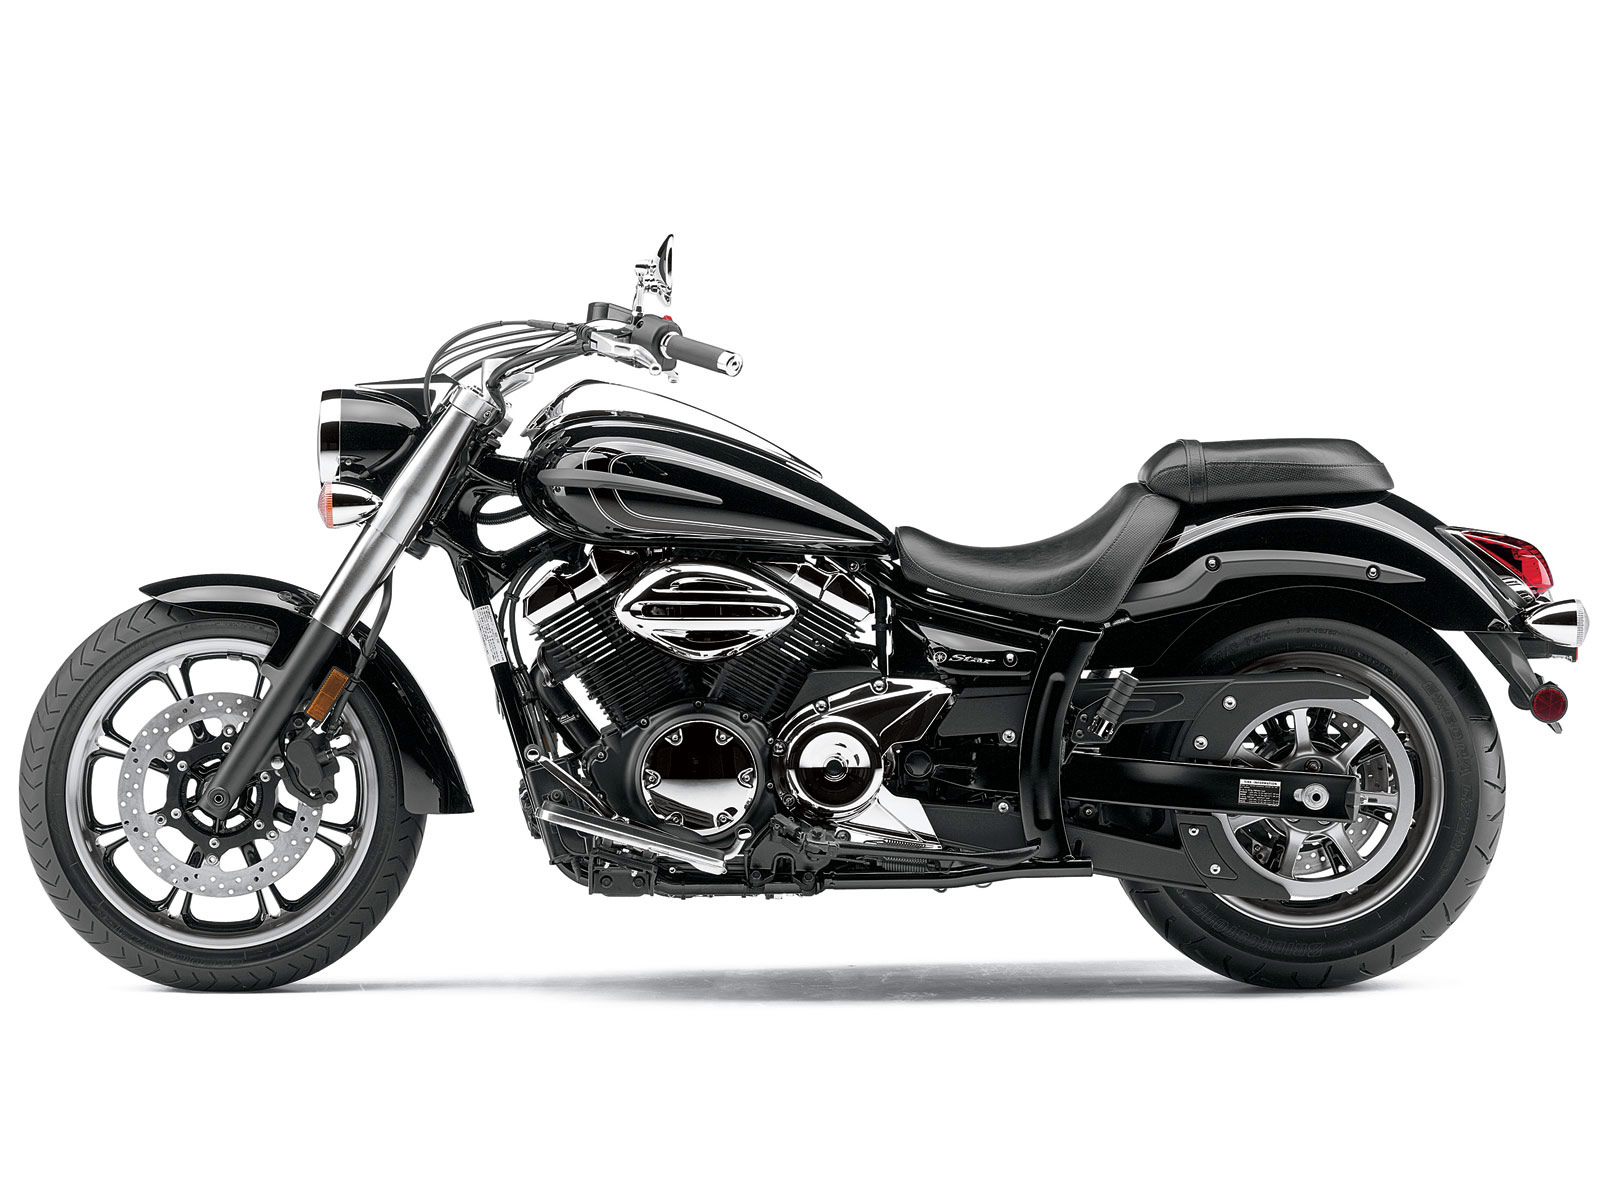 2011 YAMAHA V-Star 950 motorcycle wallpapers accident lawyer